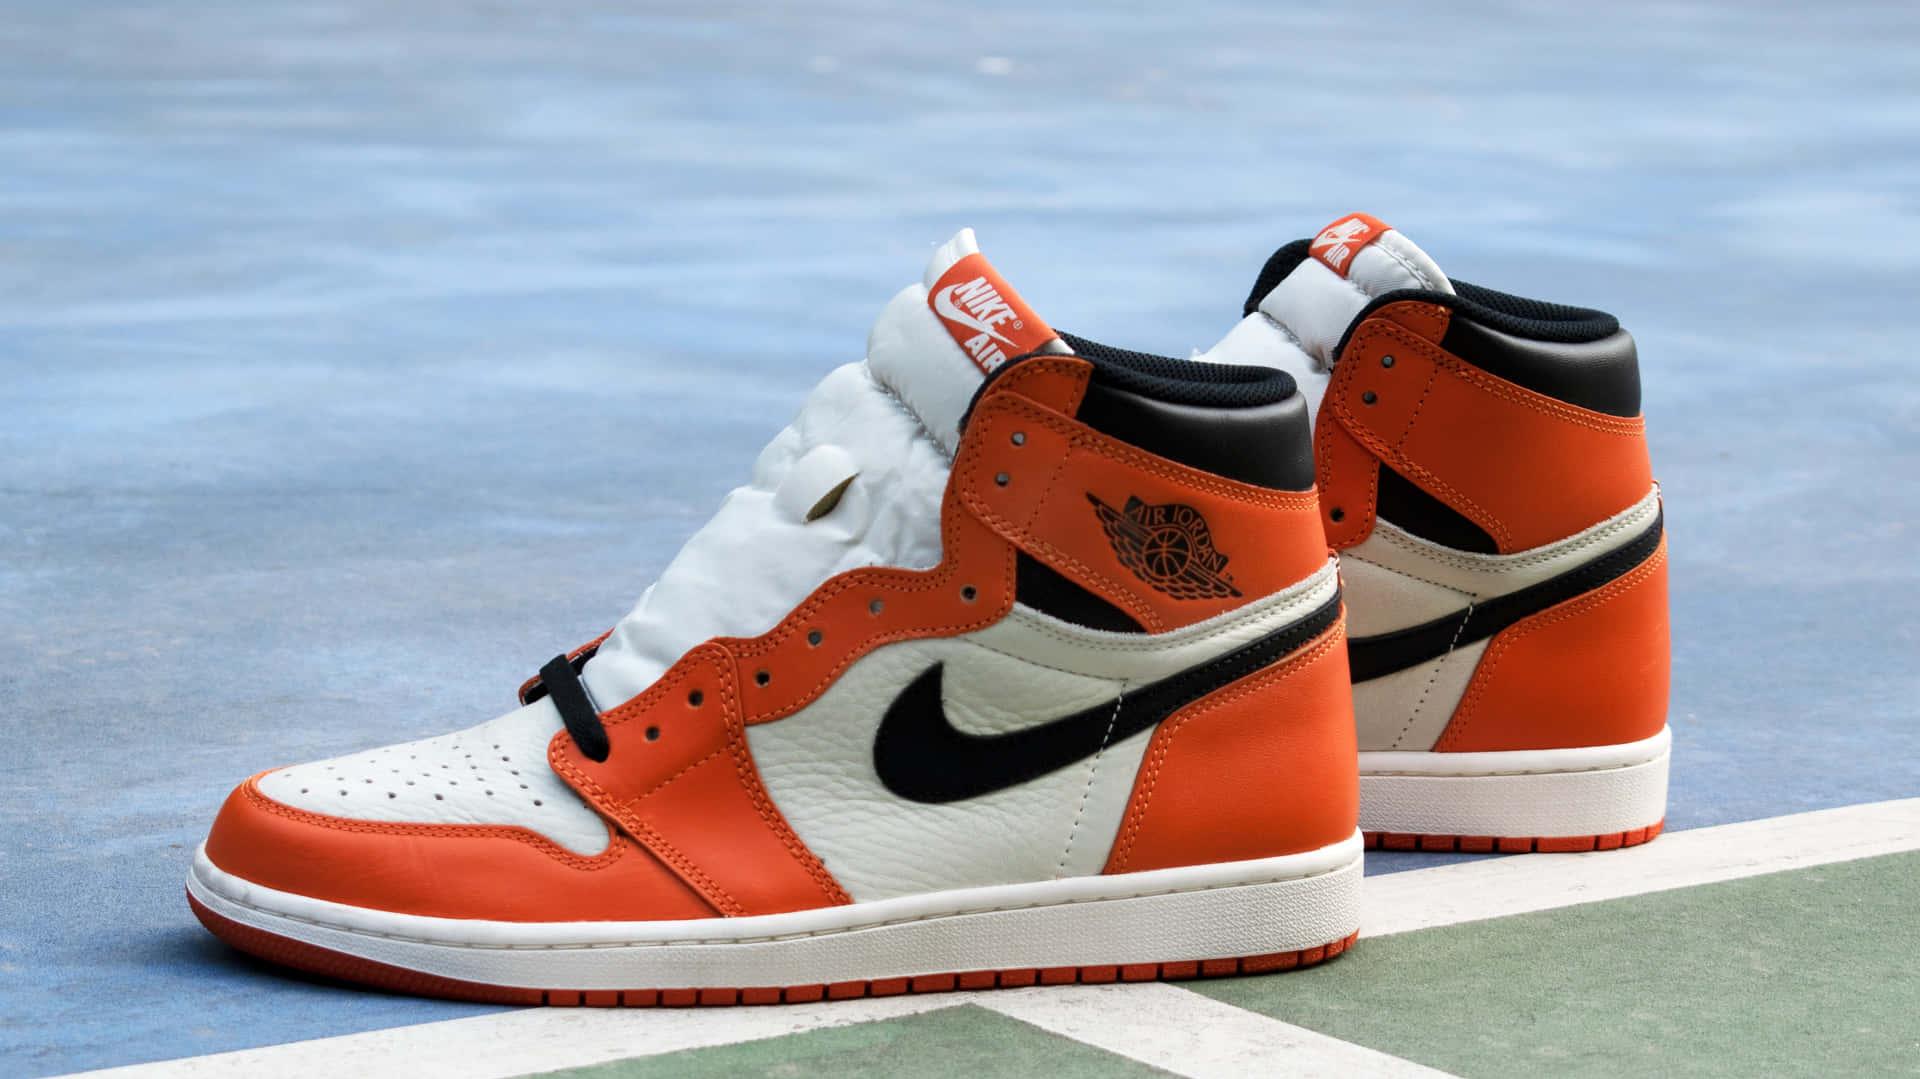 The Iconic Nike Air Jordan Sneakers Have Never Looked